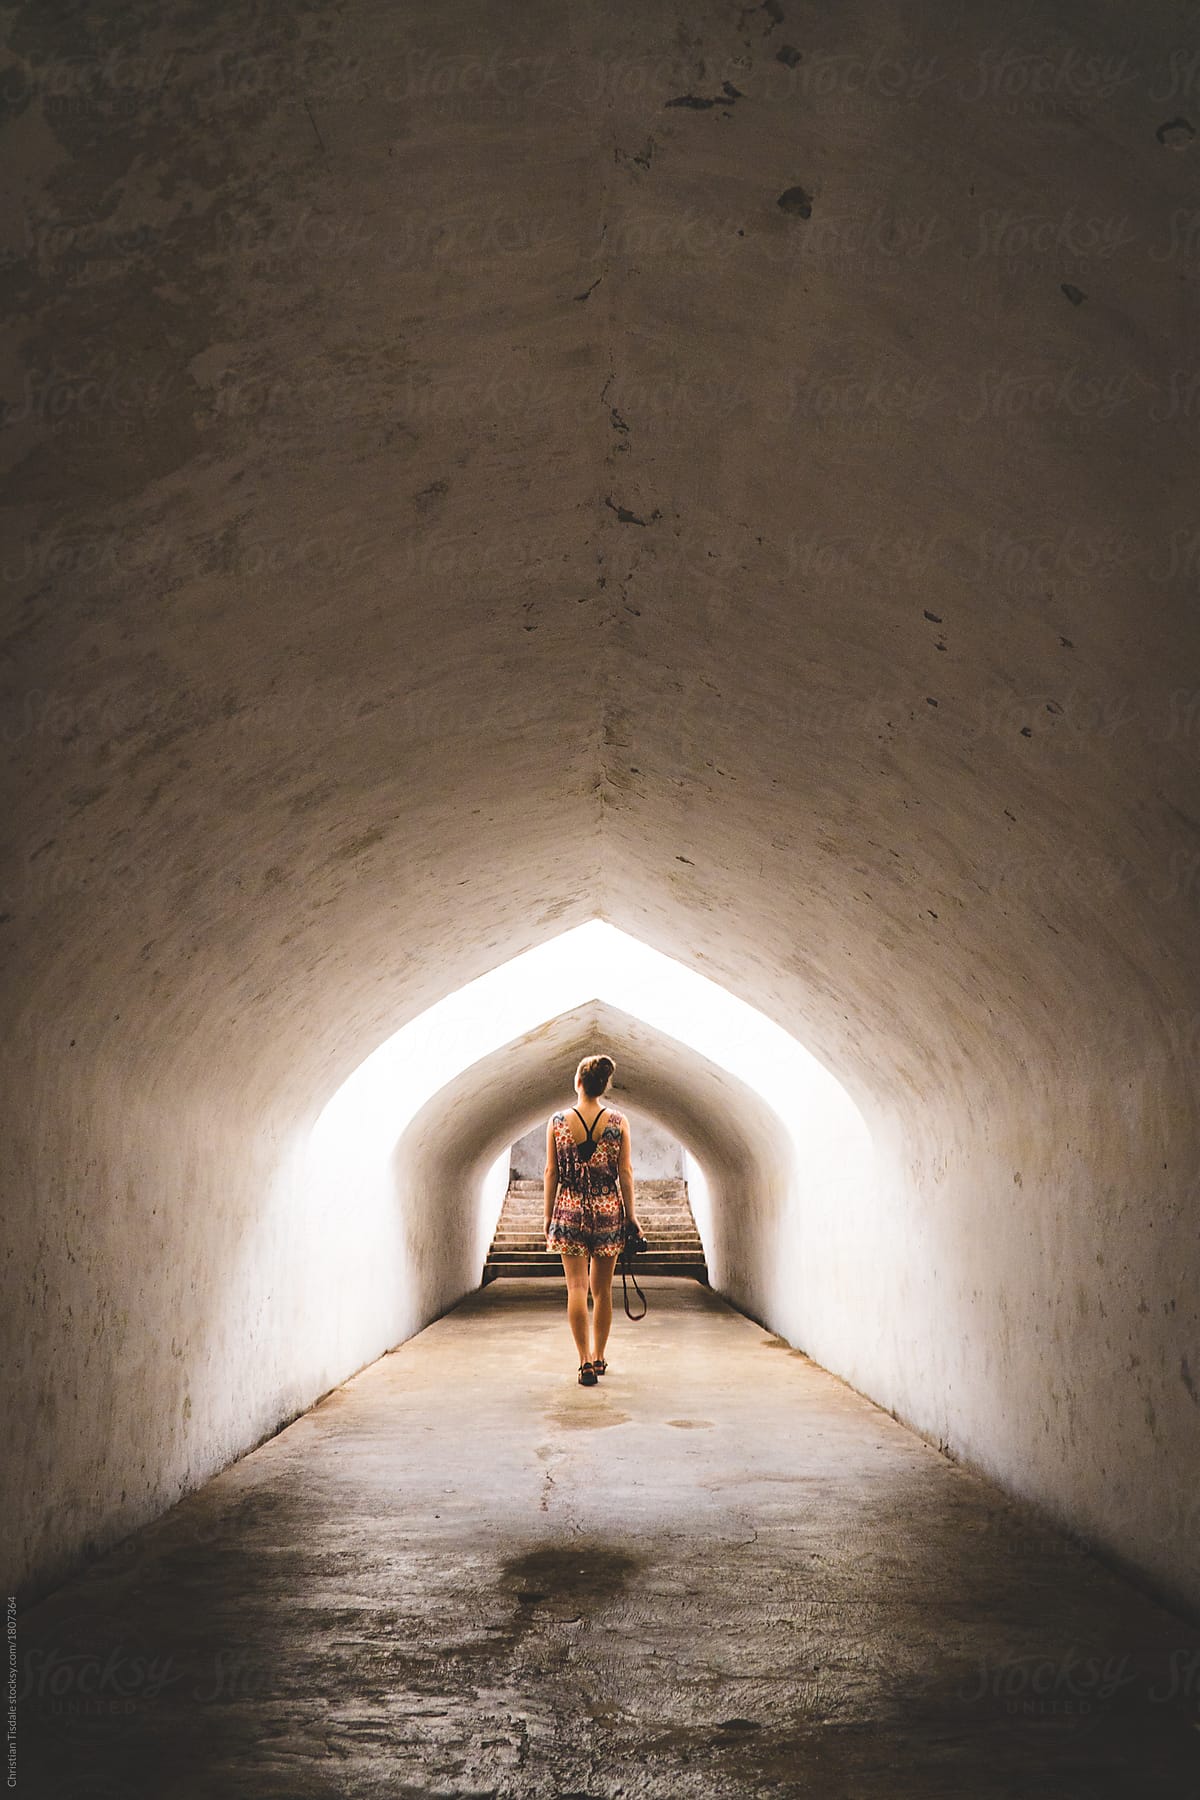 A young woman walking through a tunnel in an ancient palace